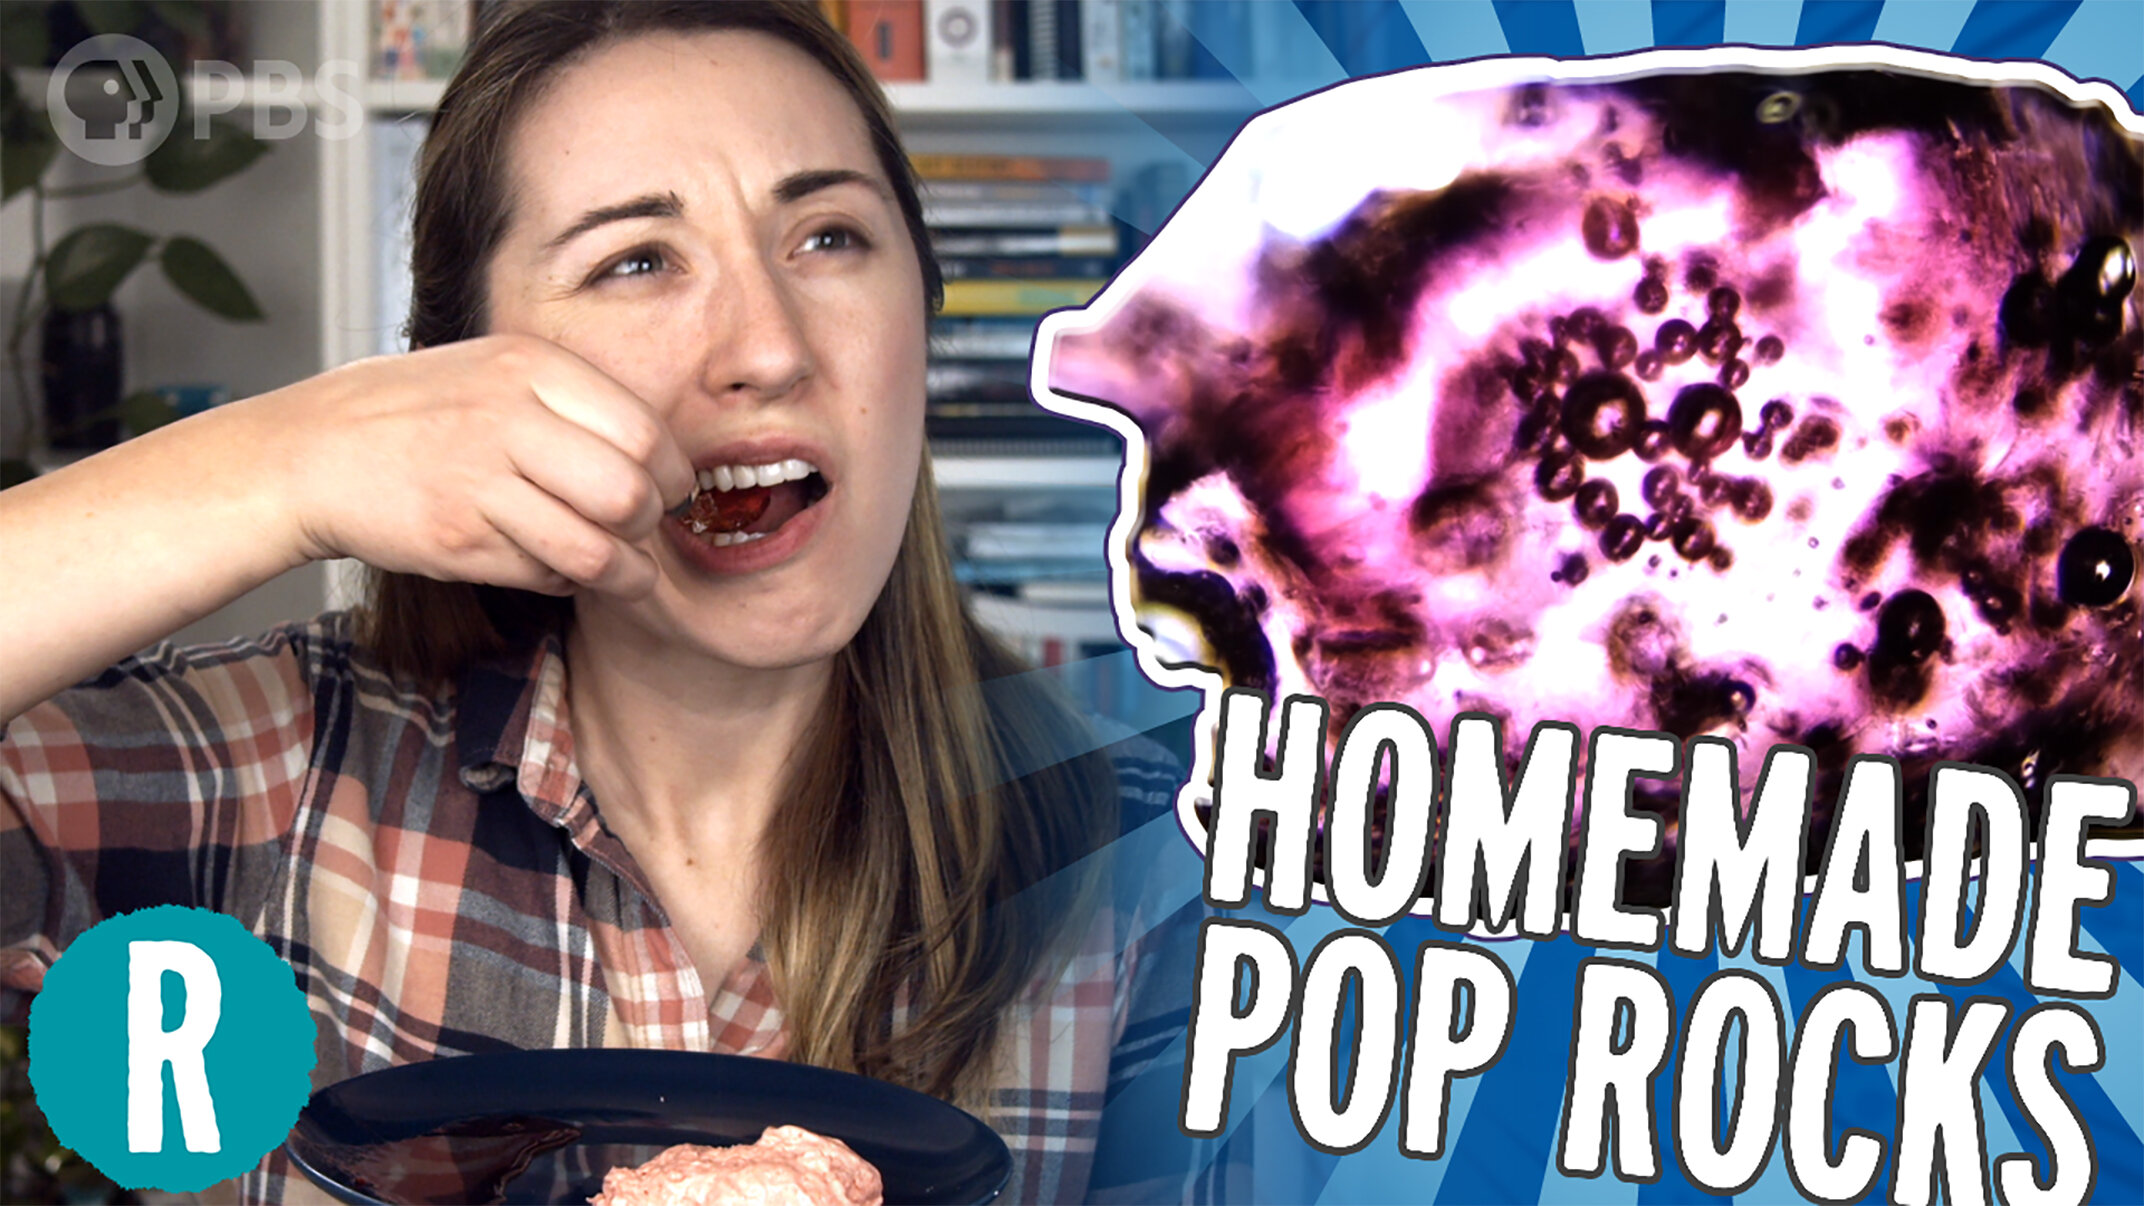 Video: We made own Pop candy, you don't have to